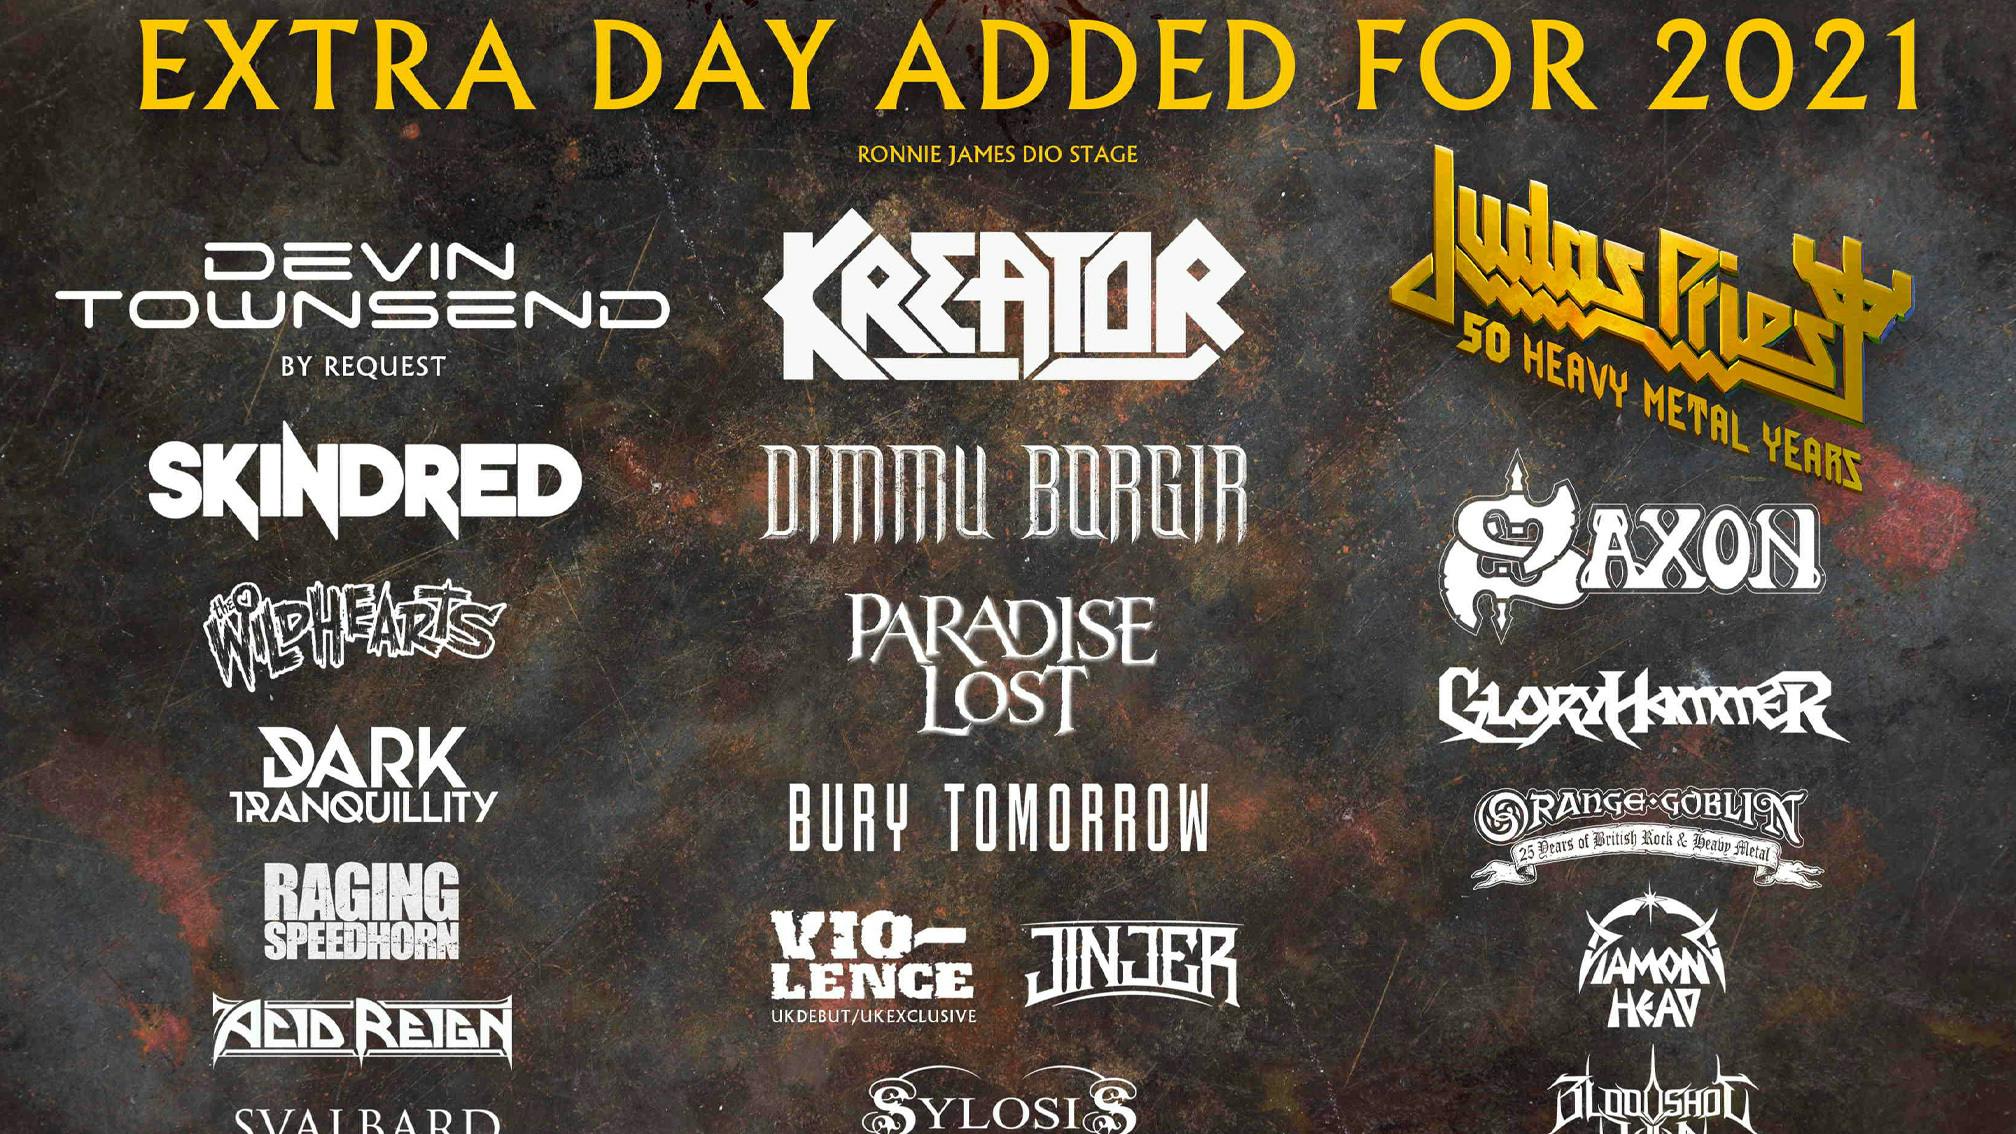 Bloodstock add 11 more bands to 2021 line-up